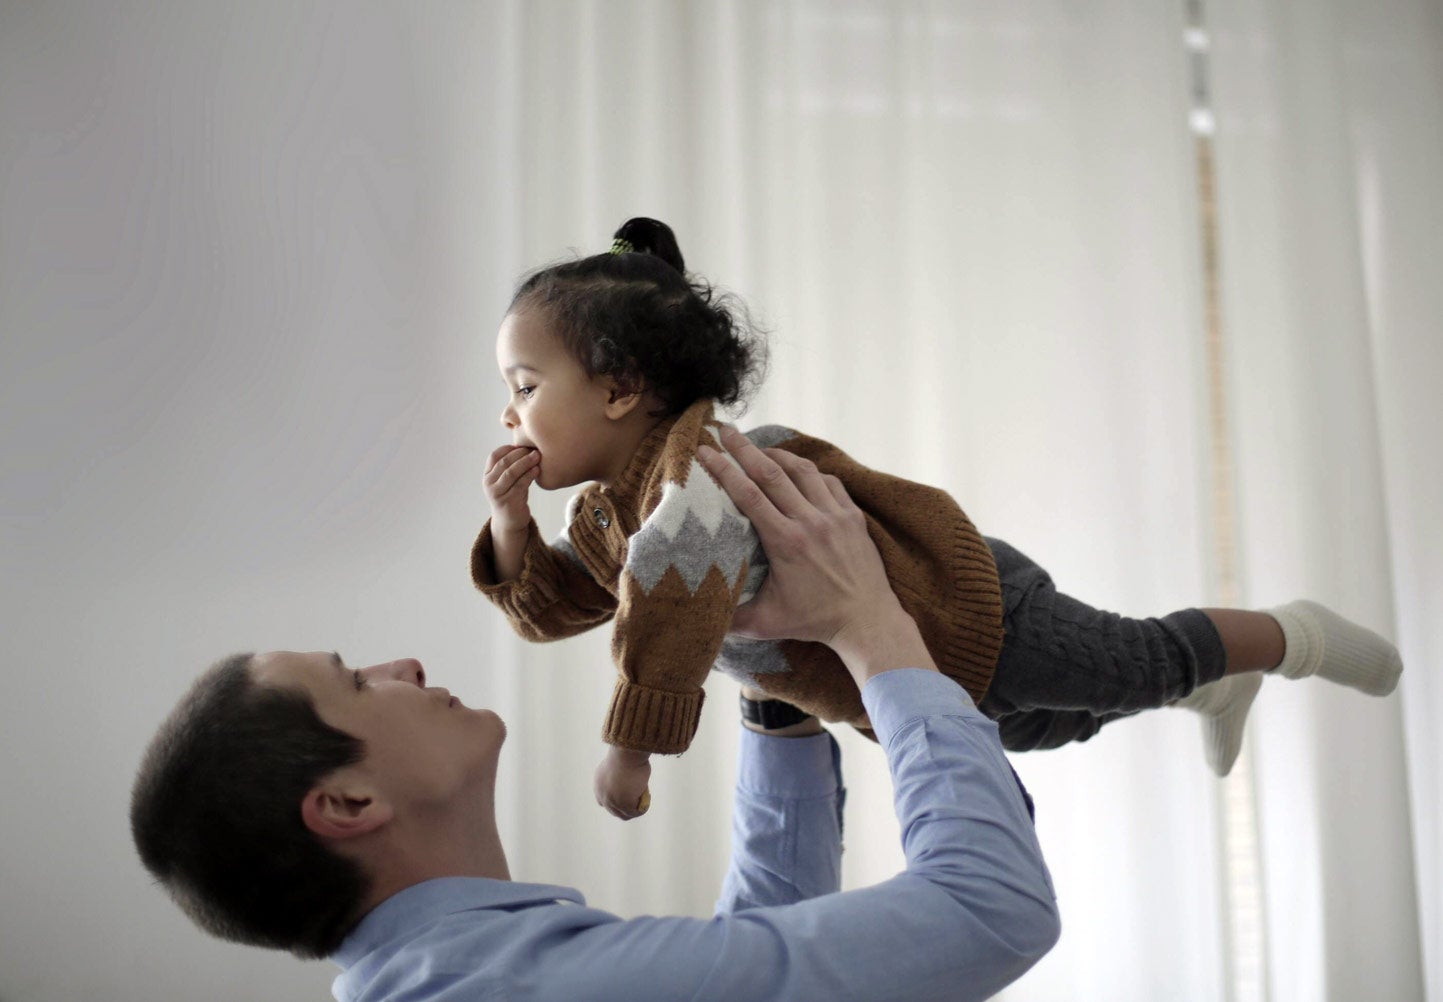 Man holding baby in the air